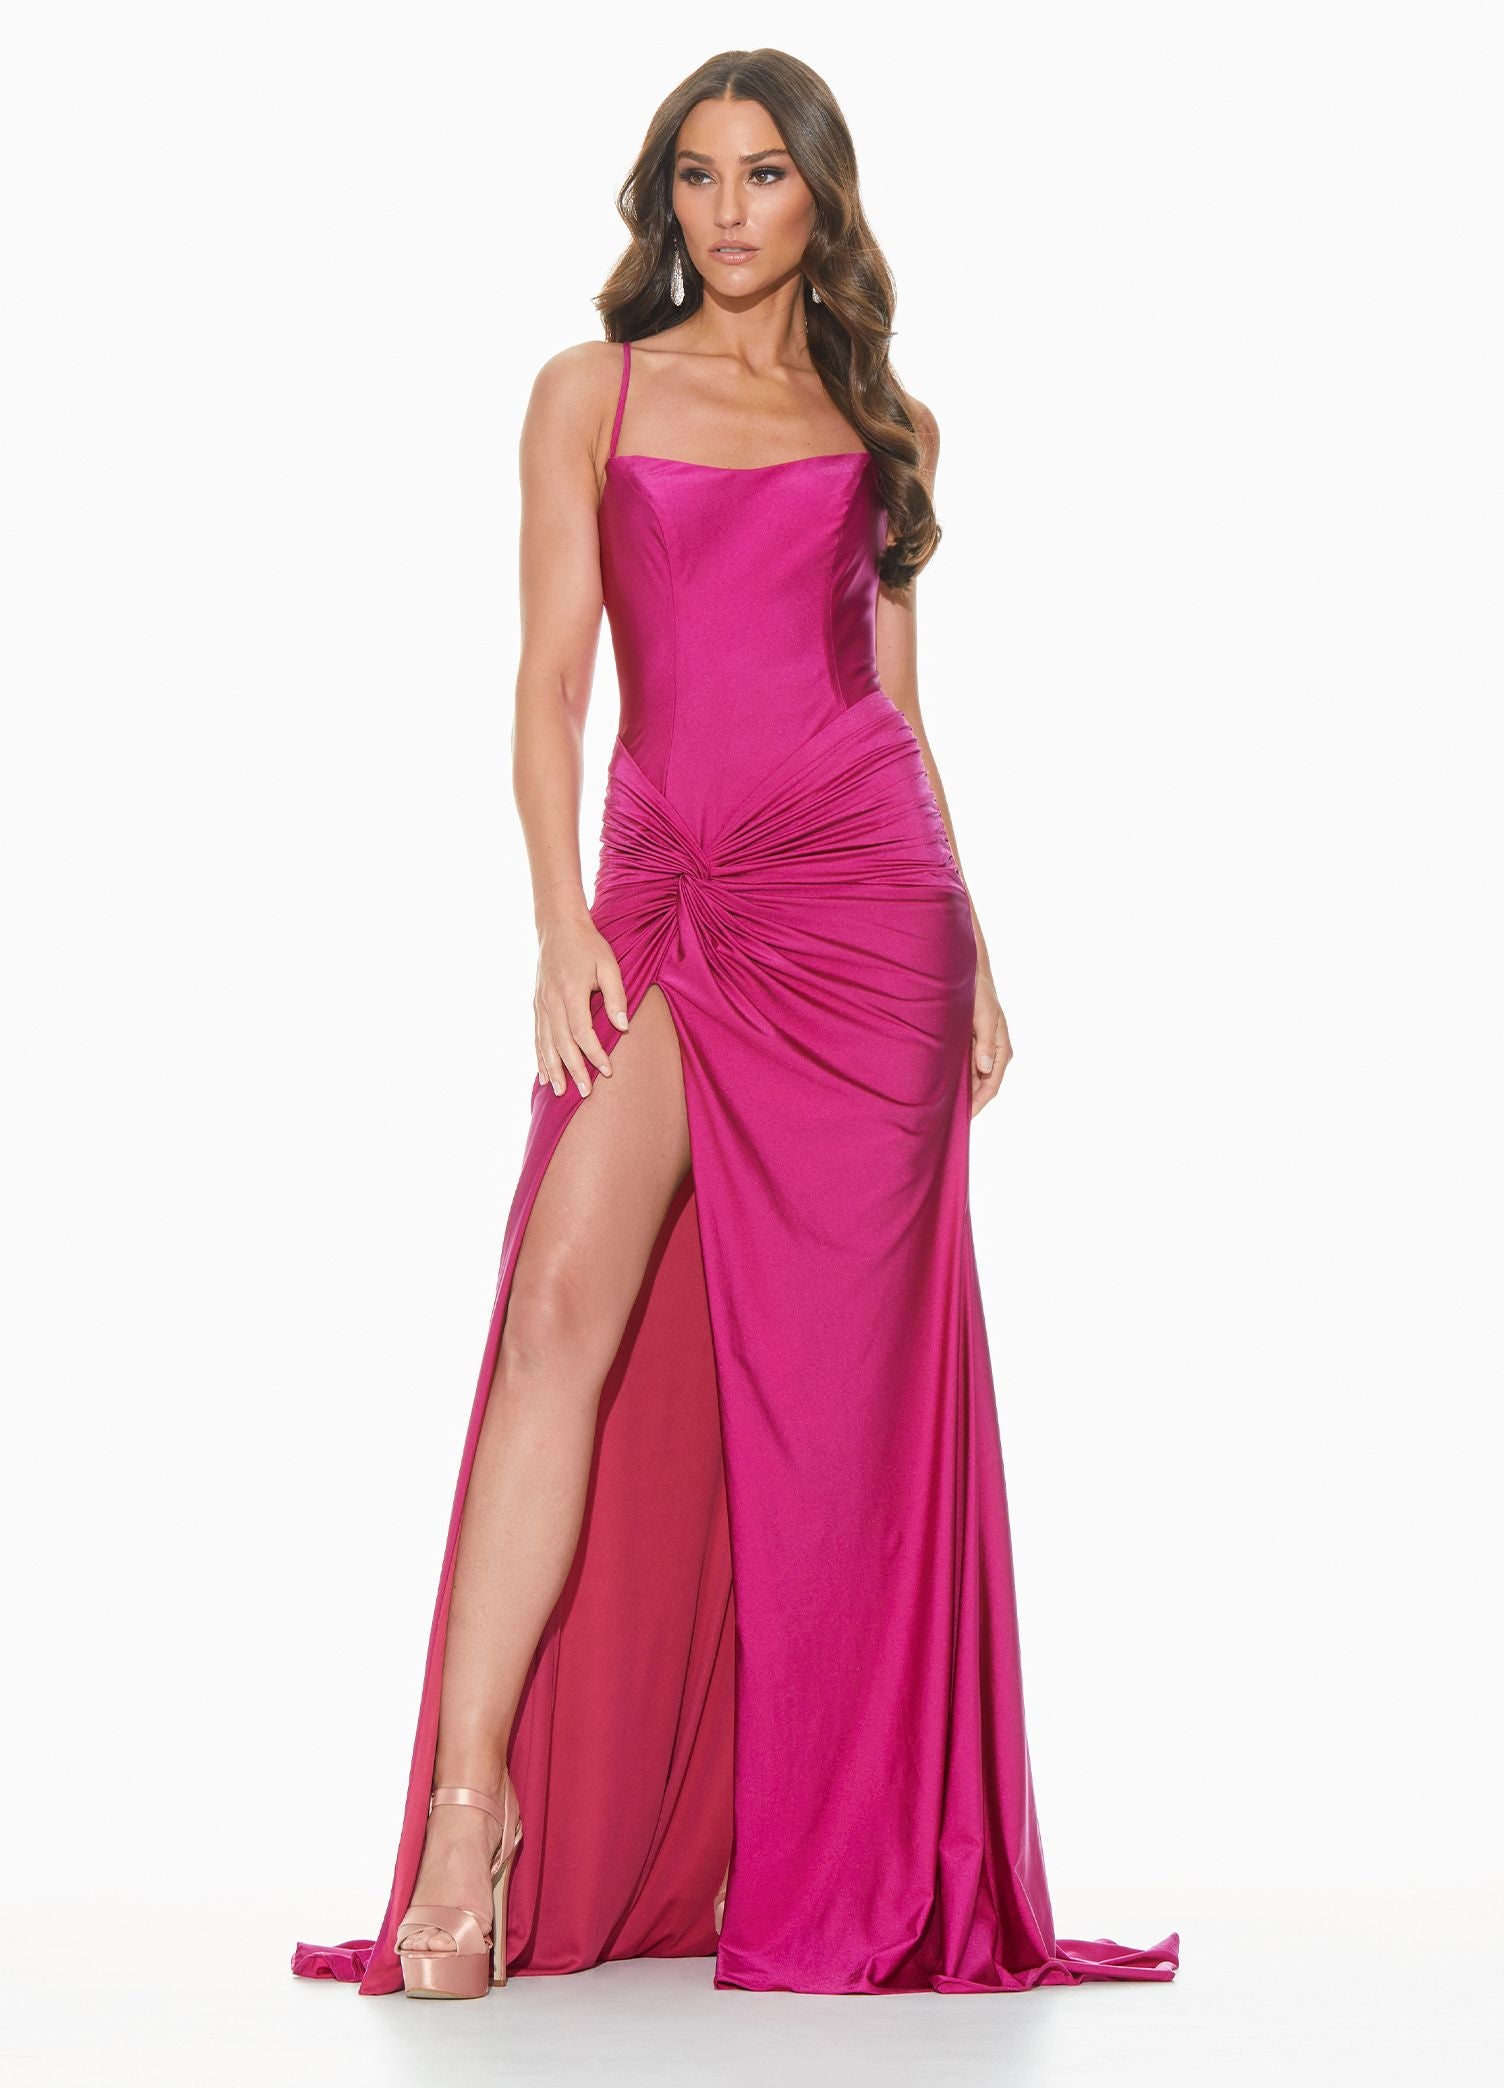 Ashley Lauren 11040 Wow in this chic evening gown with a lace up back and twist knot detail. The hip on this prom dress is adorned with a twist knot detail that gives way to a right leg slit. The skirt on this pageant dress is finished with a sweeping train.  Colors  Rose, Raspberry, Black, Royal  Sizes  0, 2, 4, 6, 8, 10, 12, 14, 16, 18  Spaghetti Straps Twist Knot Detail Slit Lace up Back Jersey